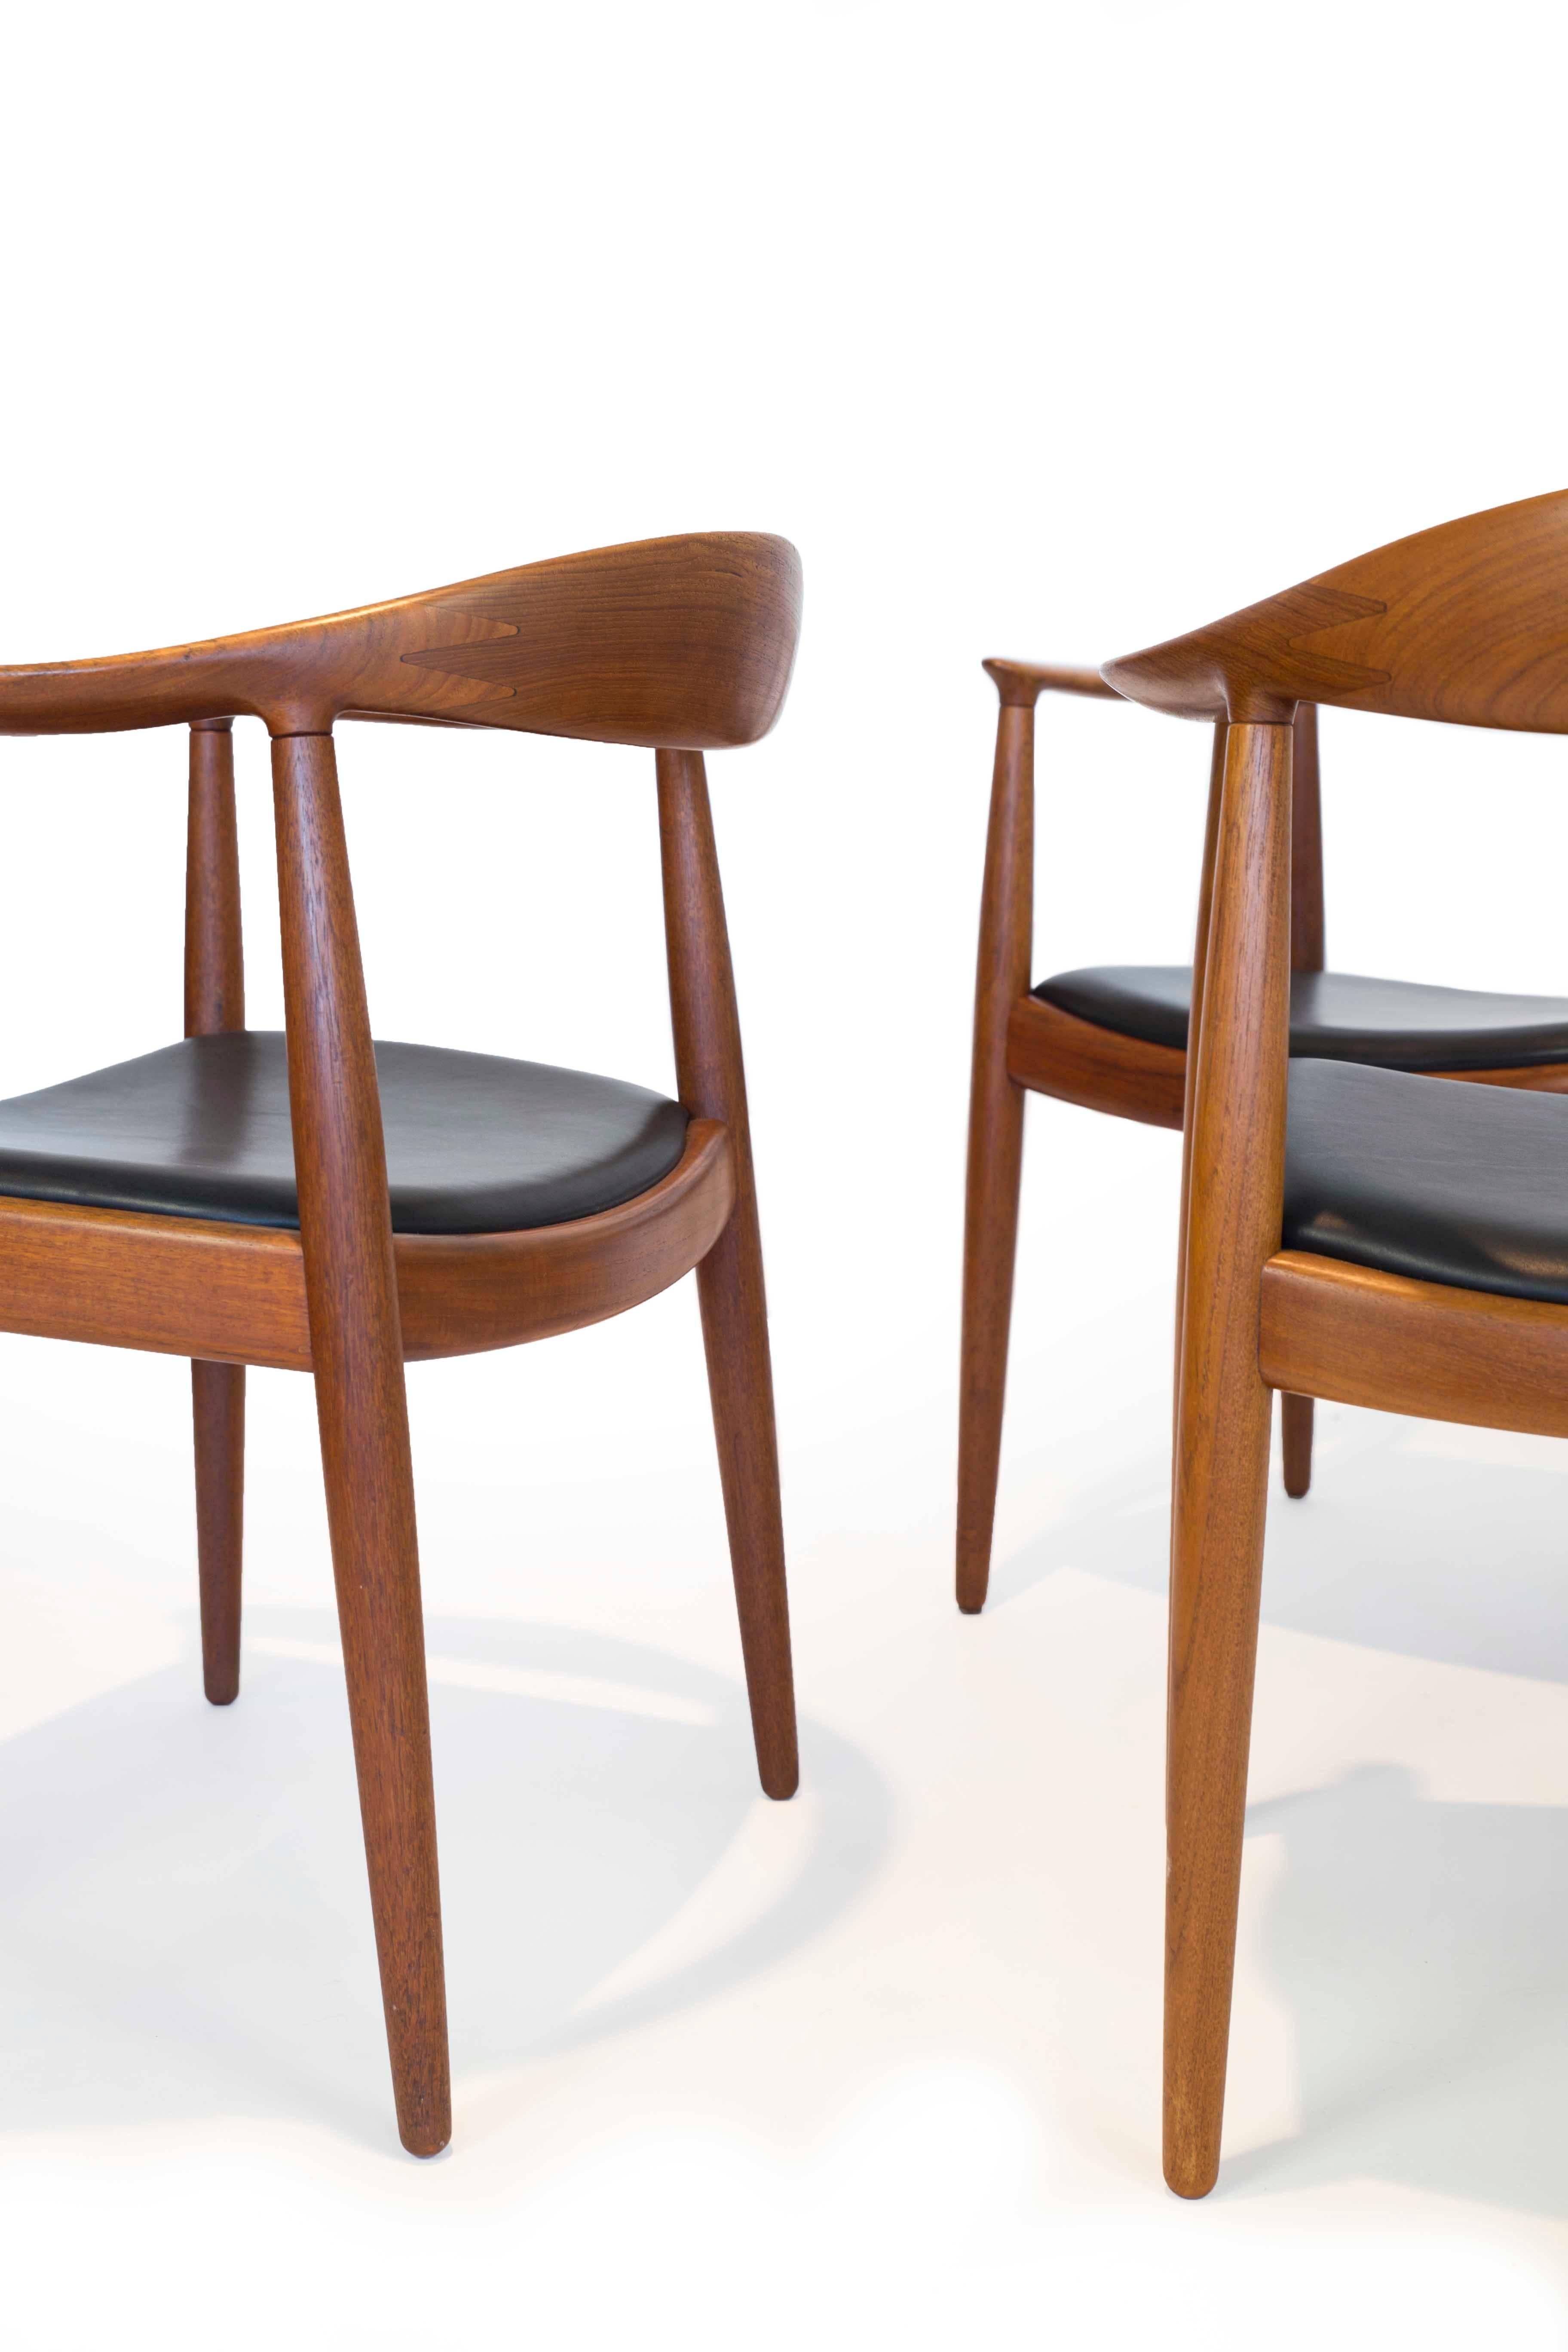 A set of six Hans J. Wegner 'The chair' with teak frame and black leather seats. 

Designed by Hans J. Wegner 1949, manufactured and marked by Cabm. Johannes Hansen, Denmark, model JH503. Beautiful condition.